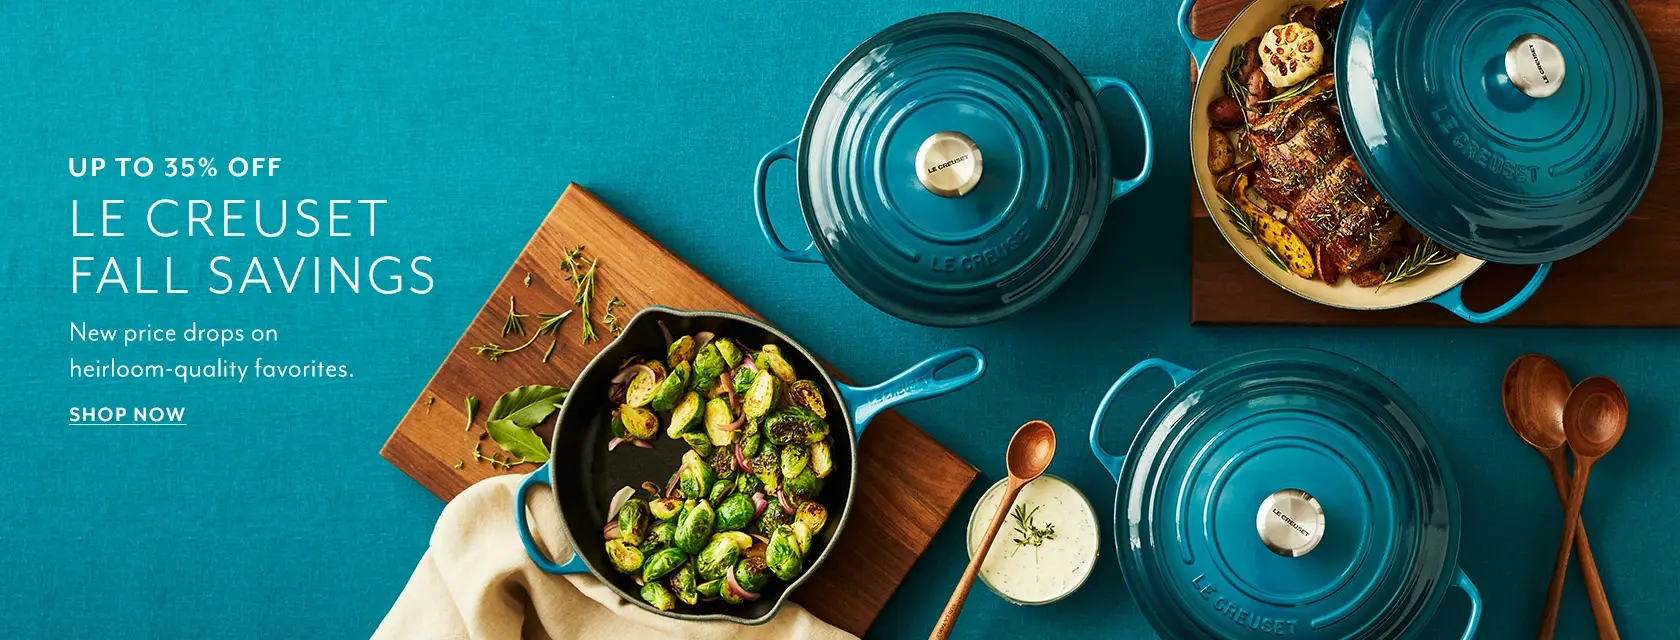 Up to 35% off Le Creuset Fall Savings. New price drops on heirloom-quality favorites. Shop Now.